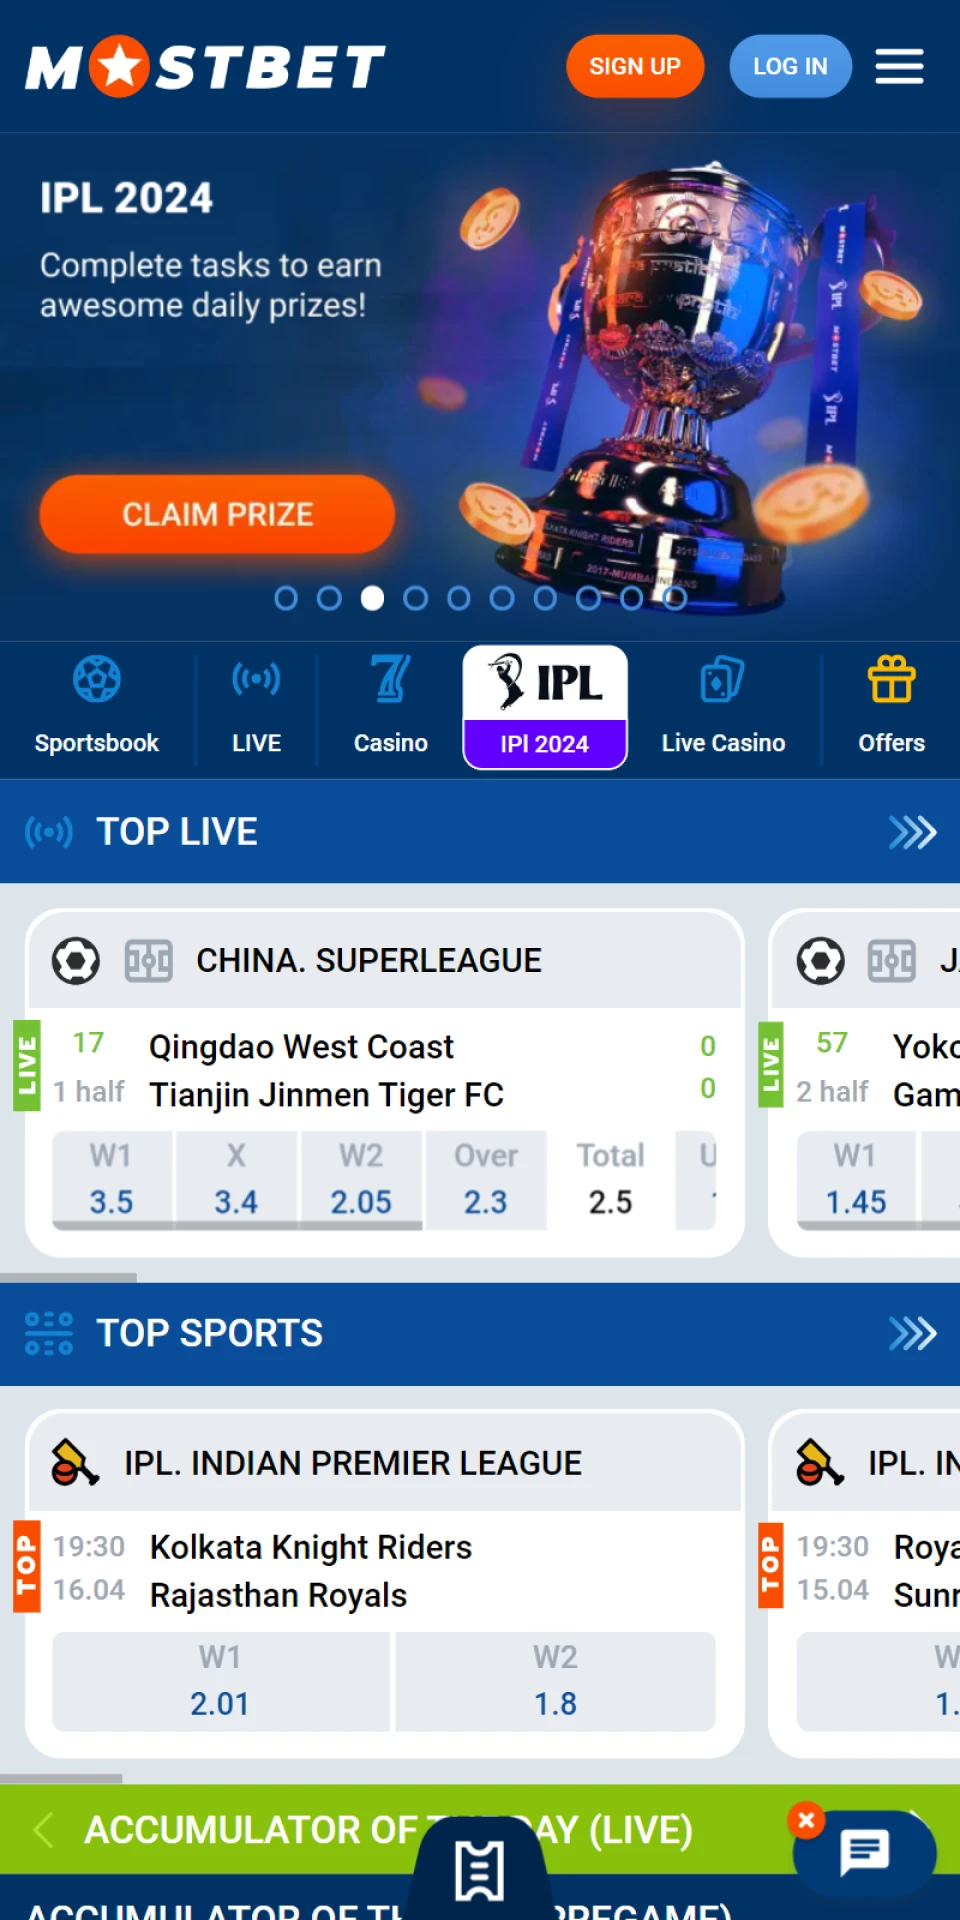 Visit the official Mostbet website from your Android device.